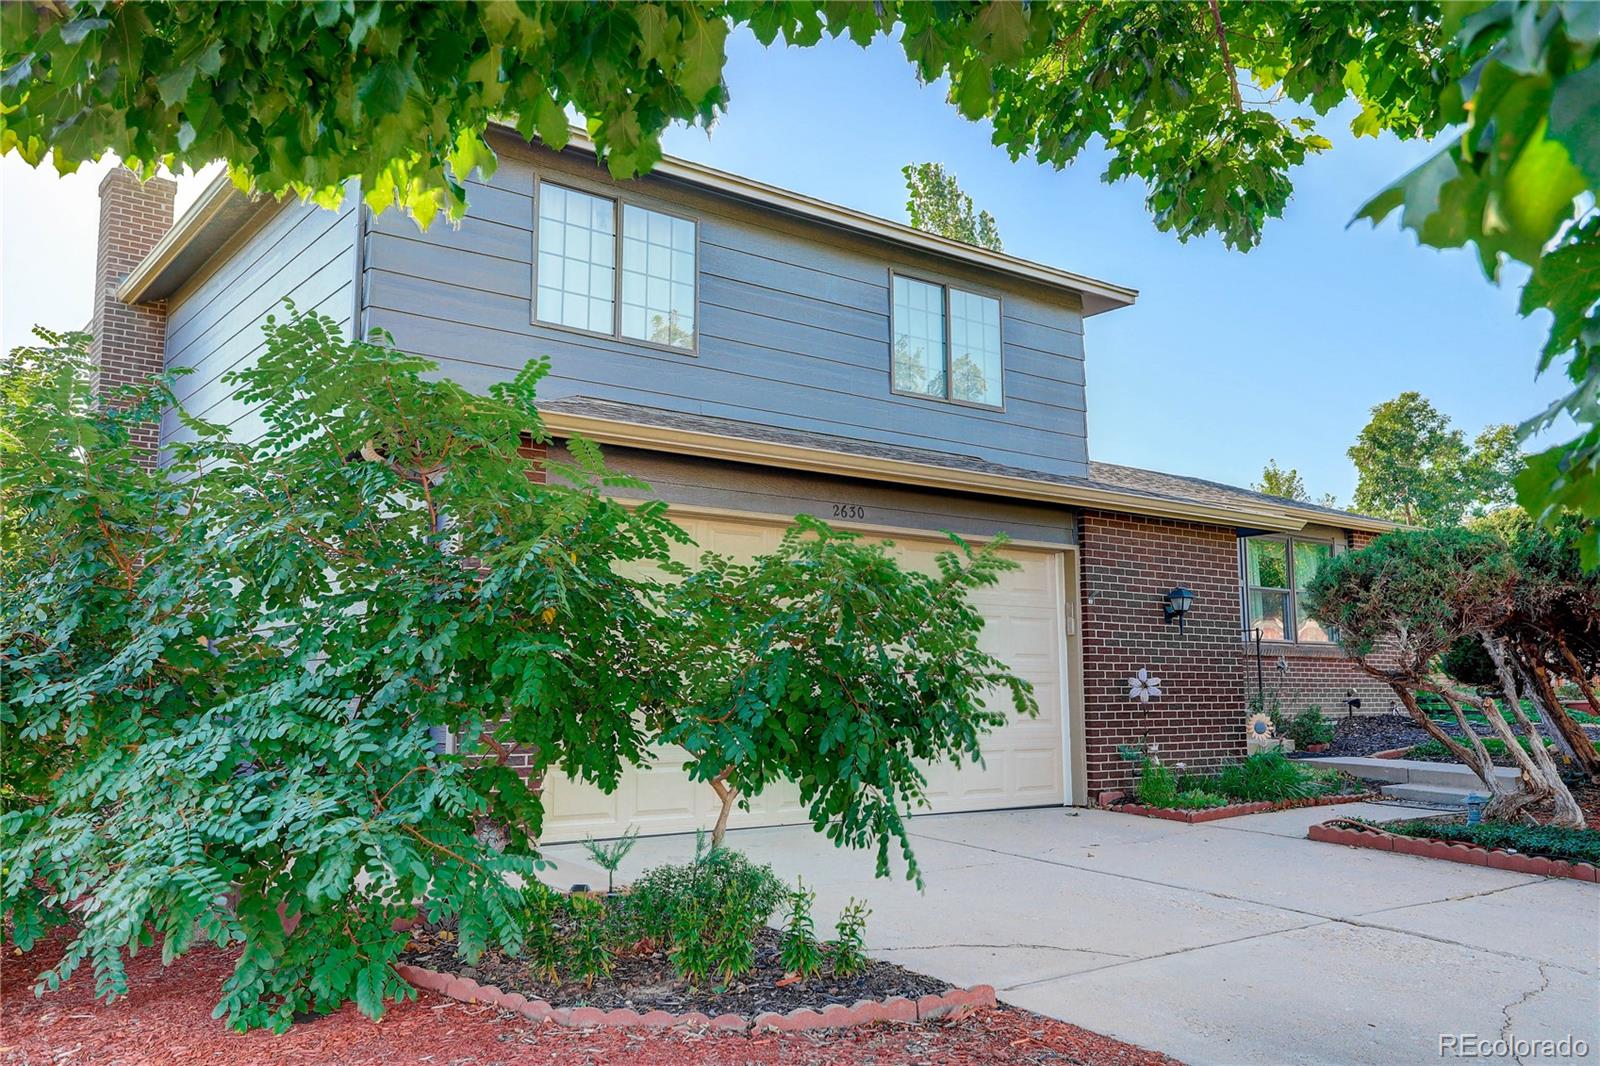 2630 s dillon street, aurora sold home. Closed on 2024-04-30 for $490,000.